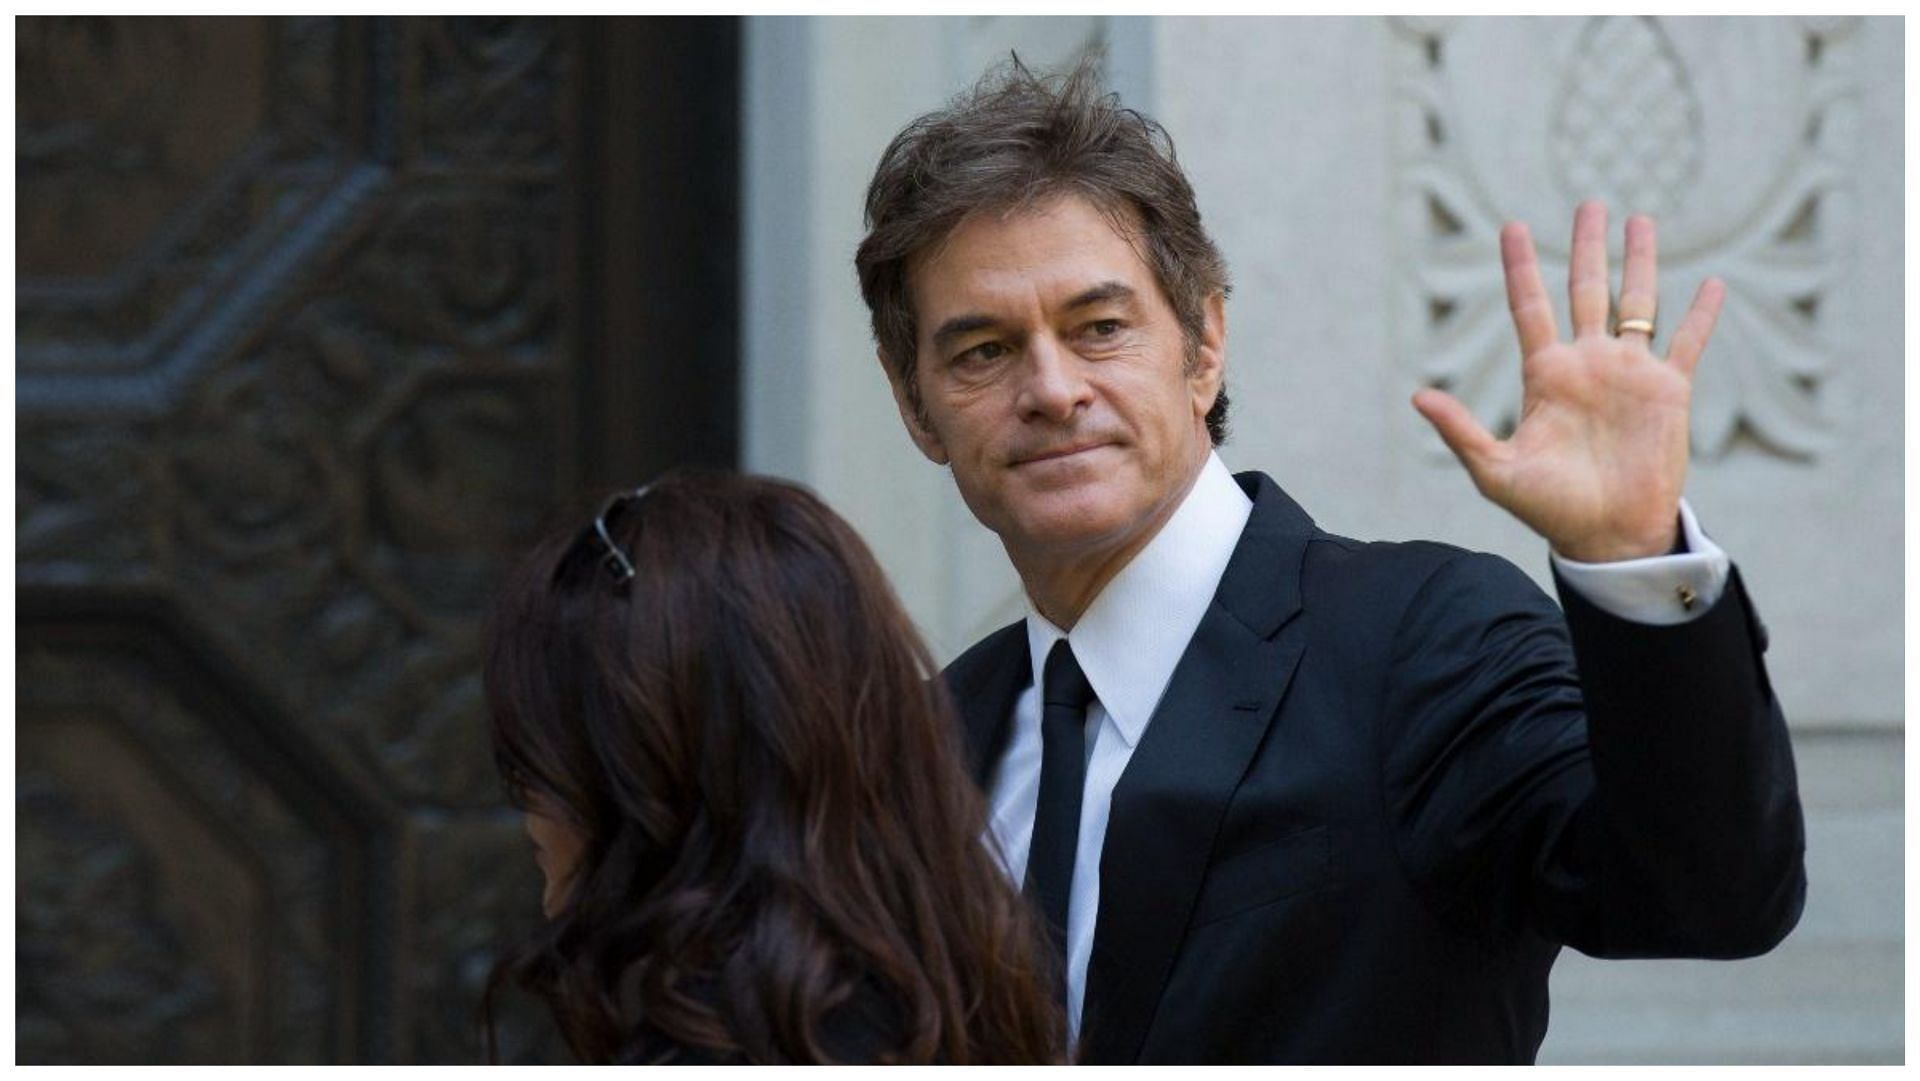 Dr. Oz is yet to win the hearts and trust of Pennsylvania citizens (image via Reuters)